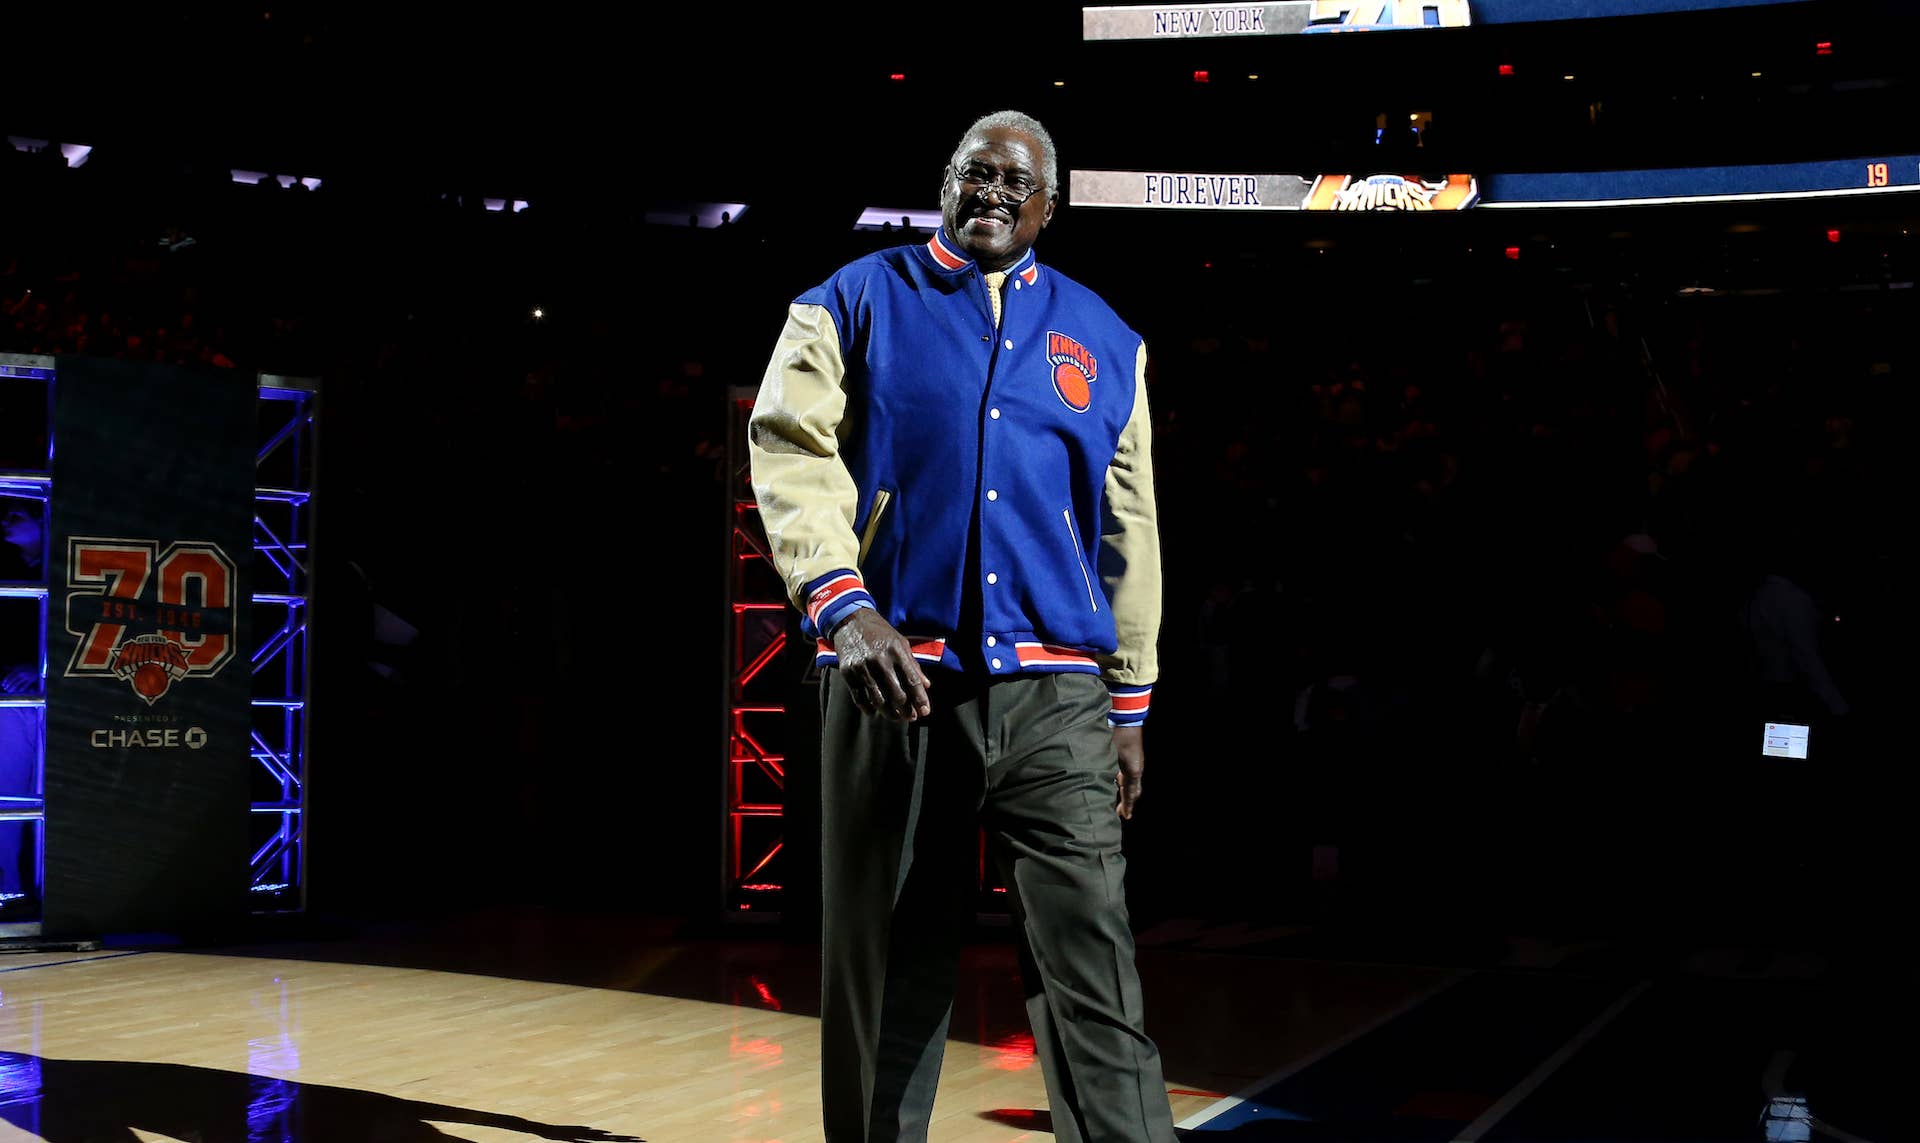 Willis Reed: New York Knicks legend, two-time NBA champion and